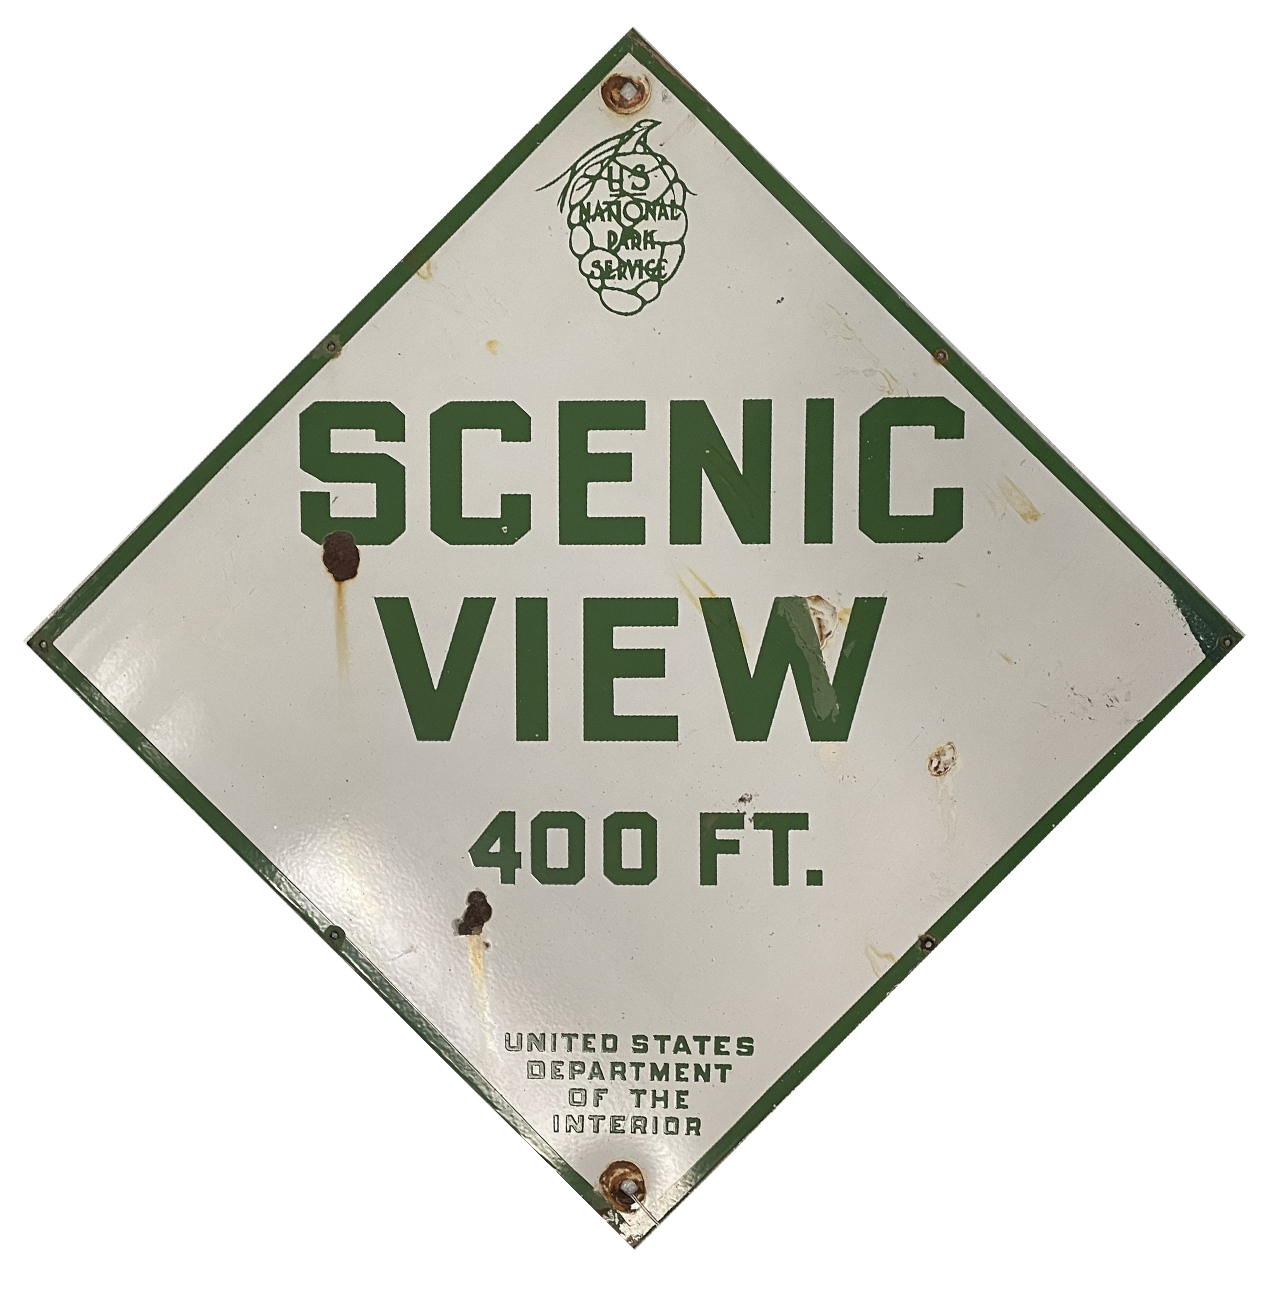 white diamond shaped sign with green sequoia cones and letters for "Scenic View"